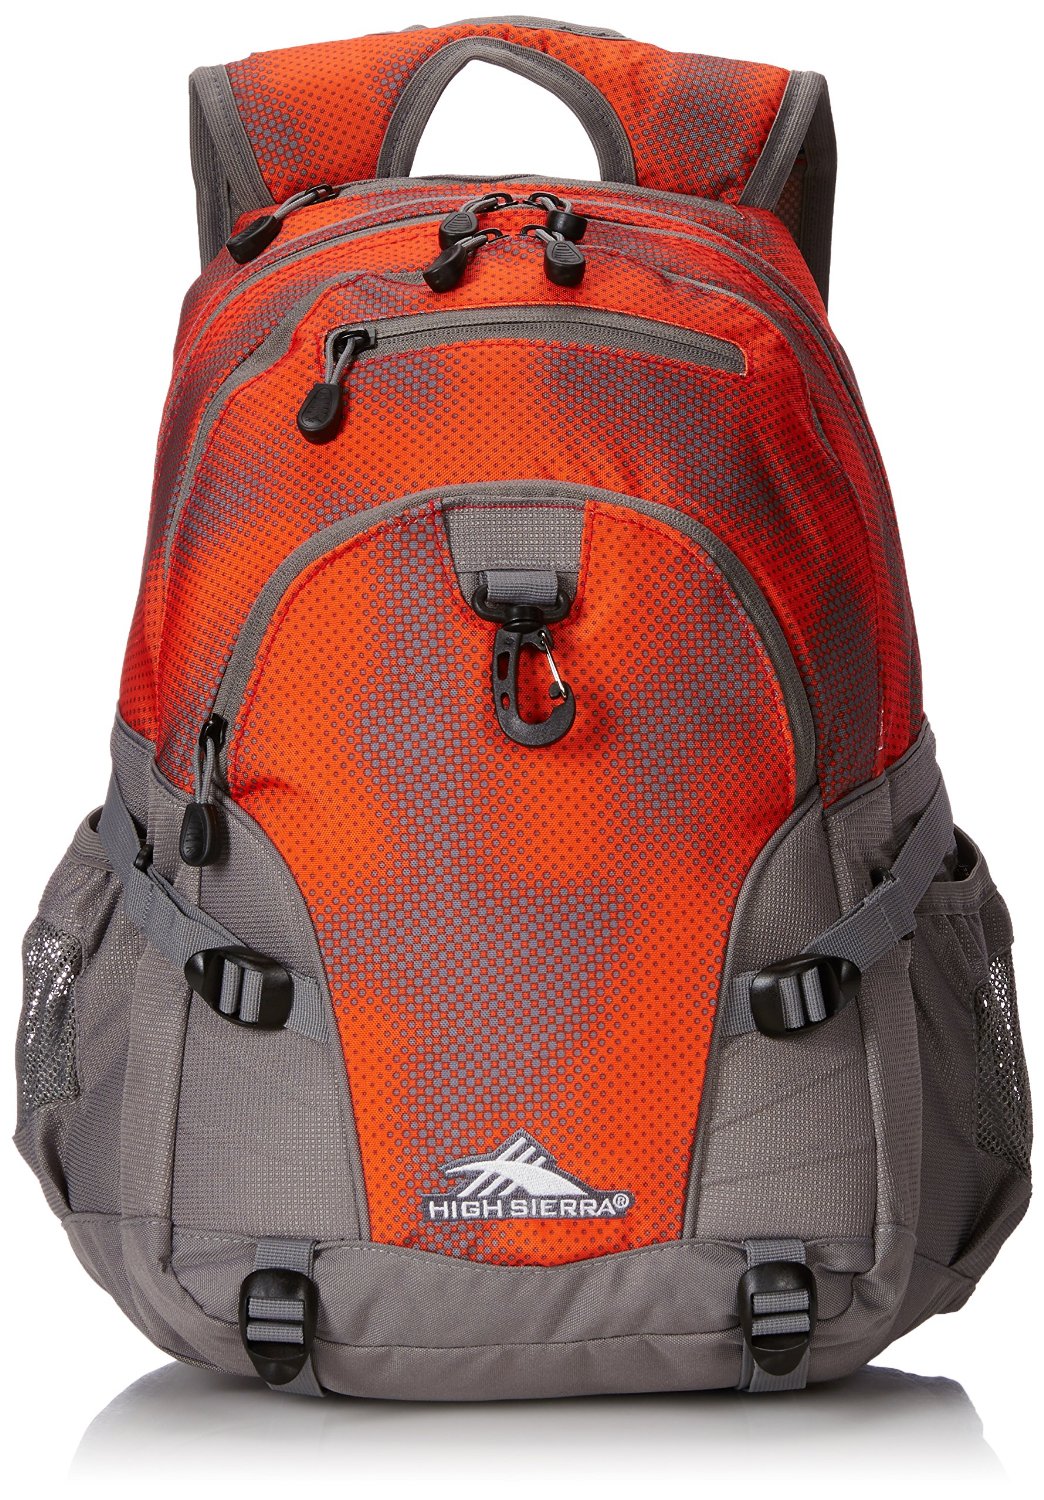 High Sierra Backpacks as low as $19.49 Today ONLY! - Become a Coupon Queen1044 x 1500